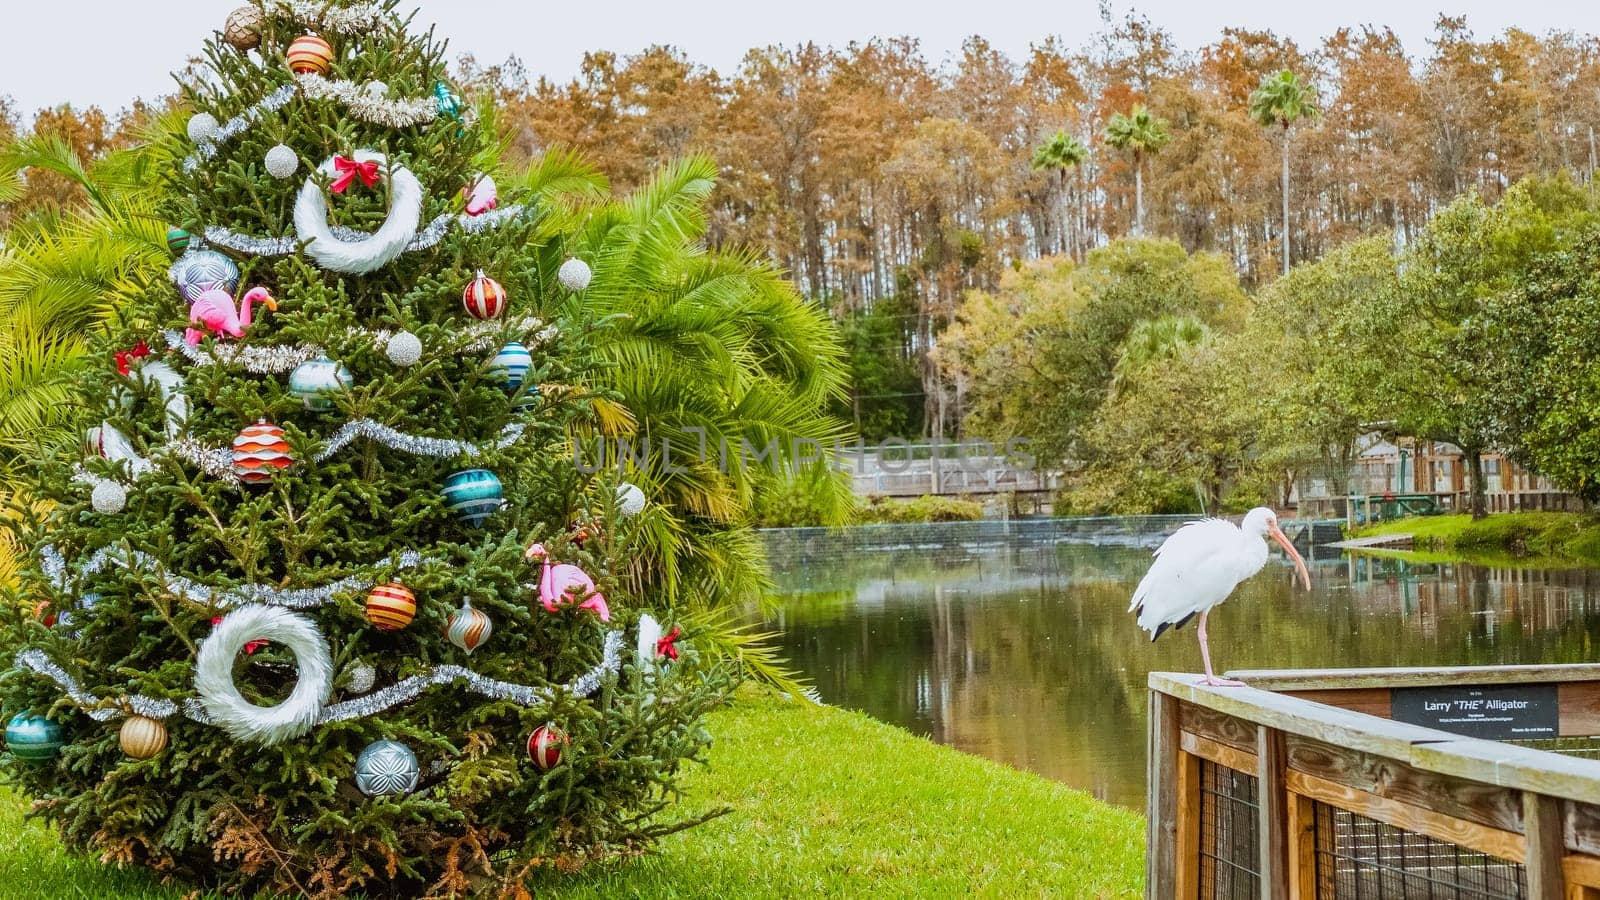 Tree adorned with colorful ornaments, lights, star. Serene lake surrounded by lush green trees and shrubs. White bird perched on branch by waters edge. Cloudy sky with hints of blue.